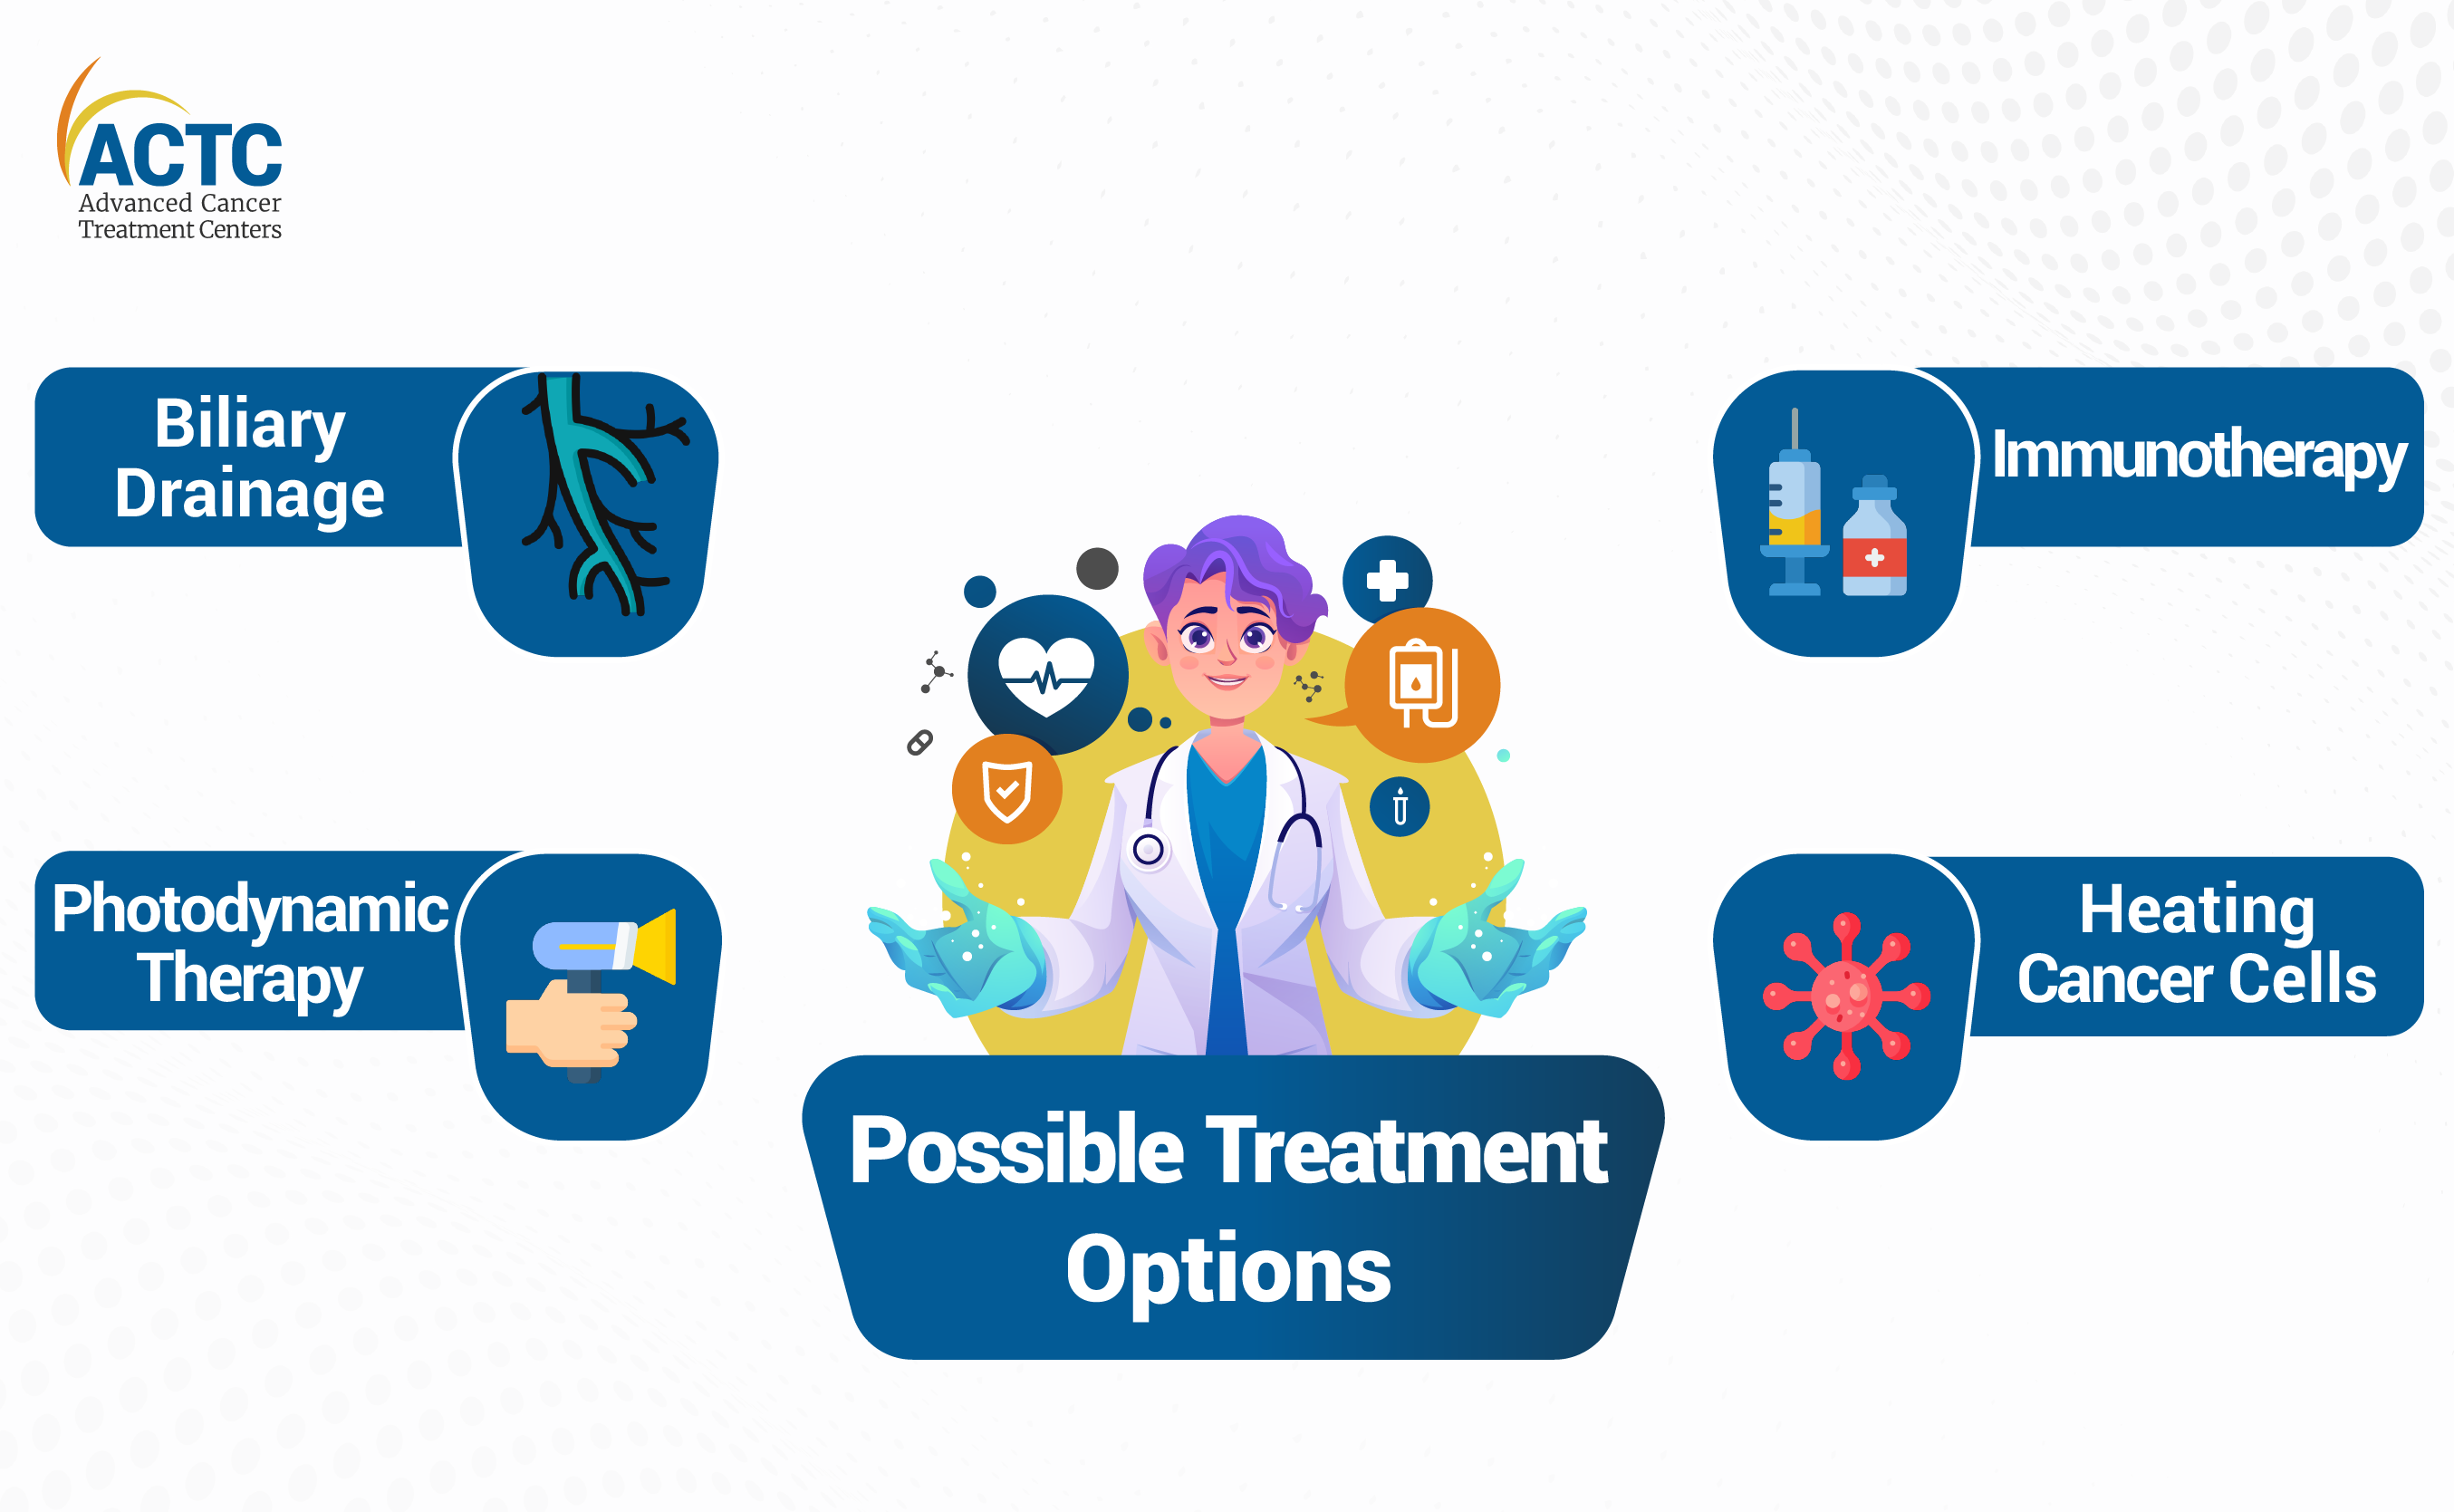 Possible Treatment Options for cholangiocarcinoma